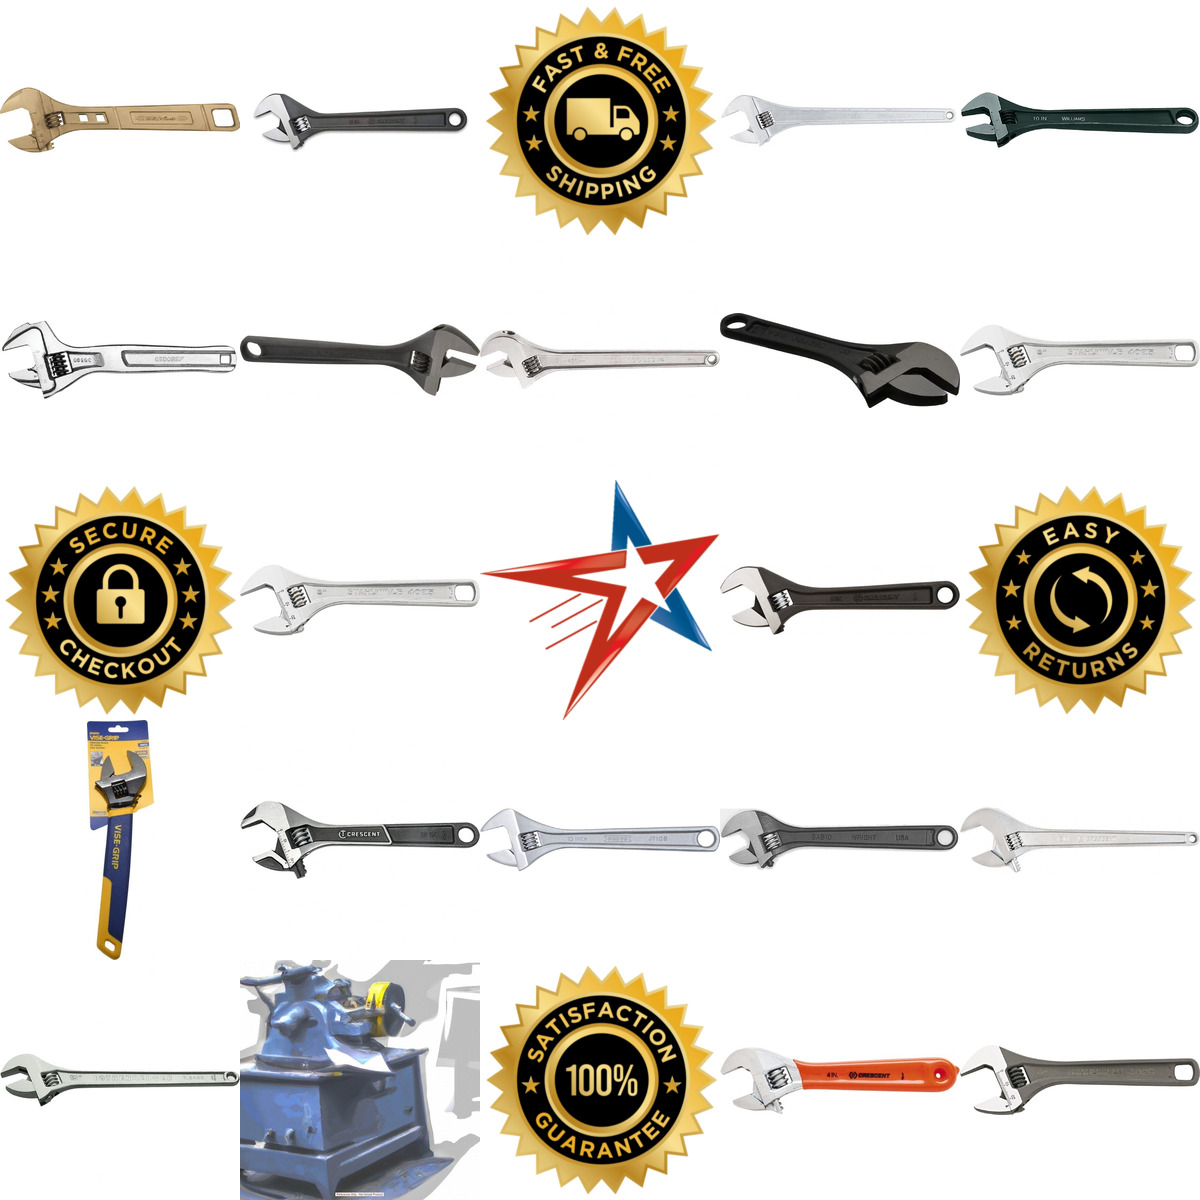 A selection of Adjustable Wrenches products on GoVets